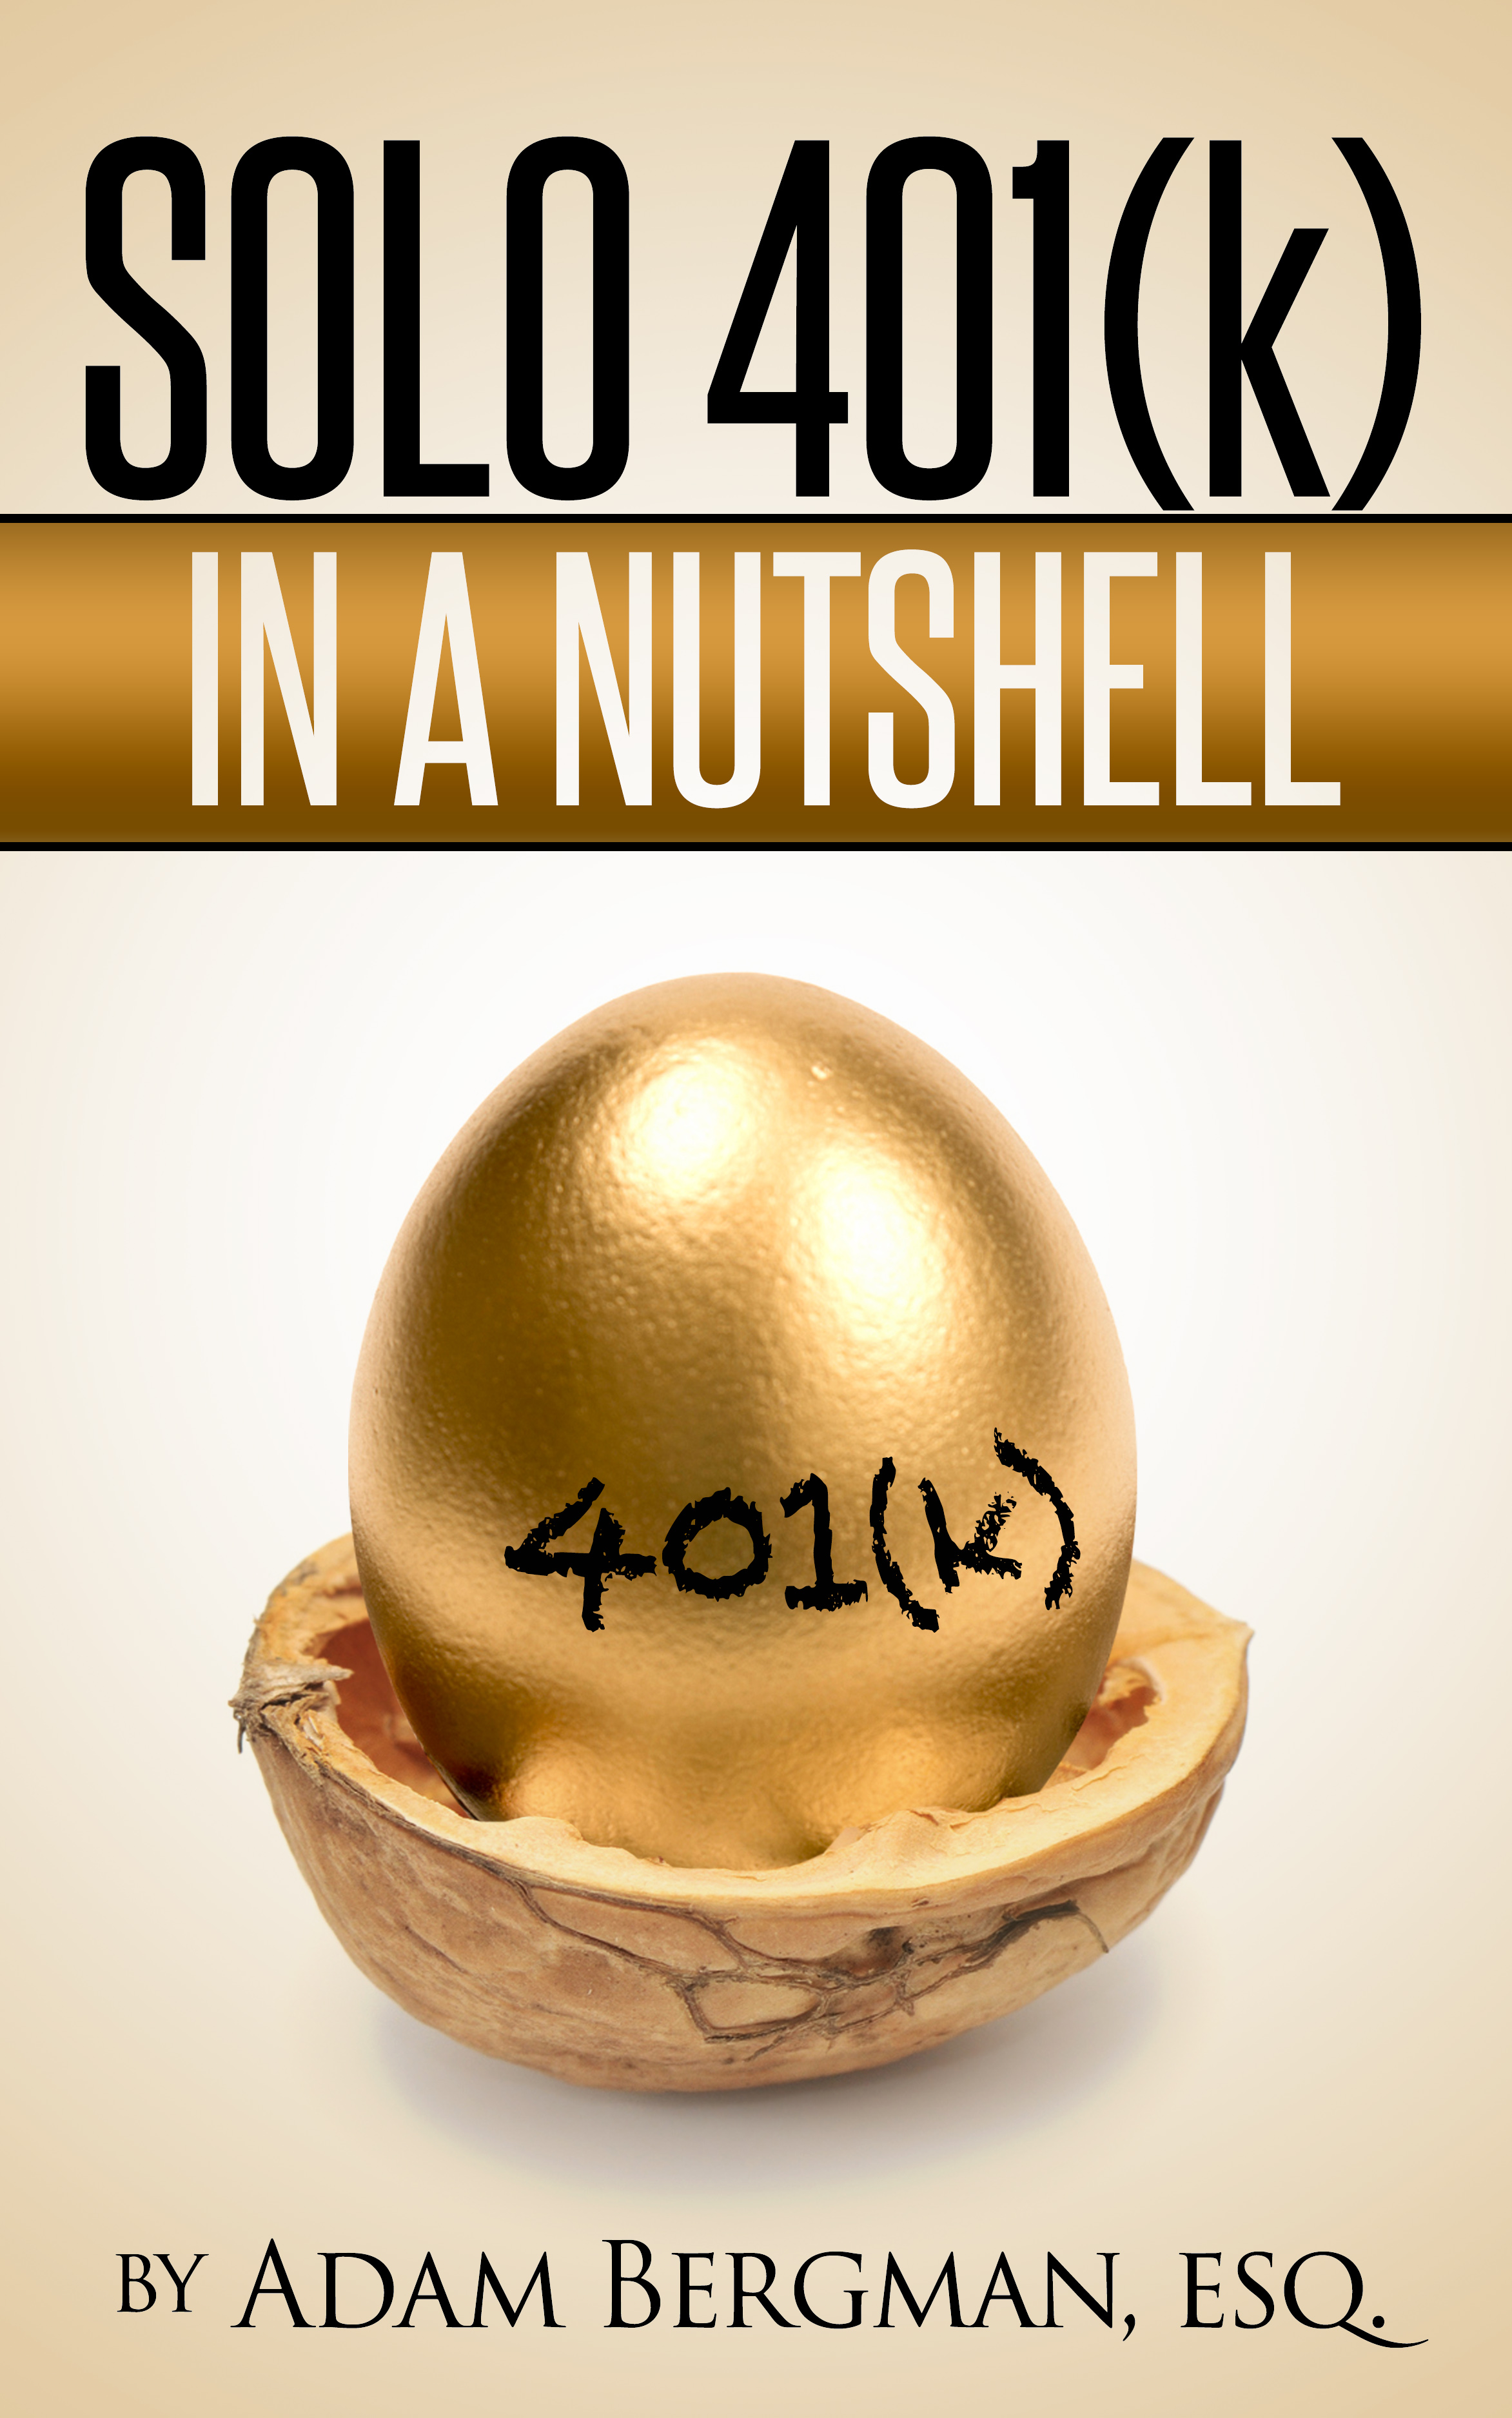 New three book Nutshell series will be become available in August 2016 on self-directed IRA, Solo 401(k) Plan, and ROBS structure